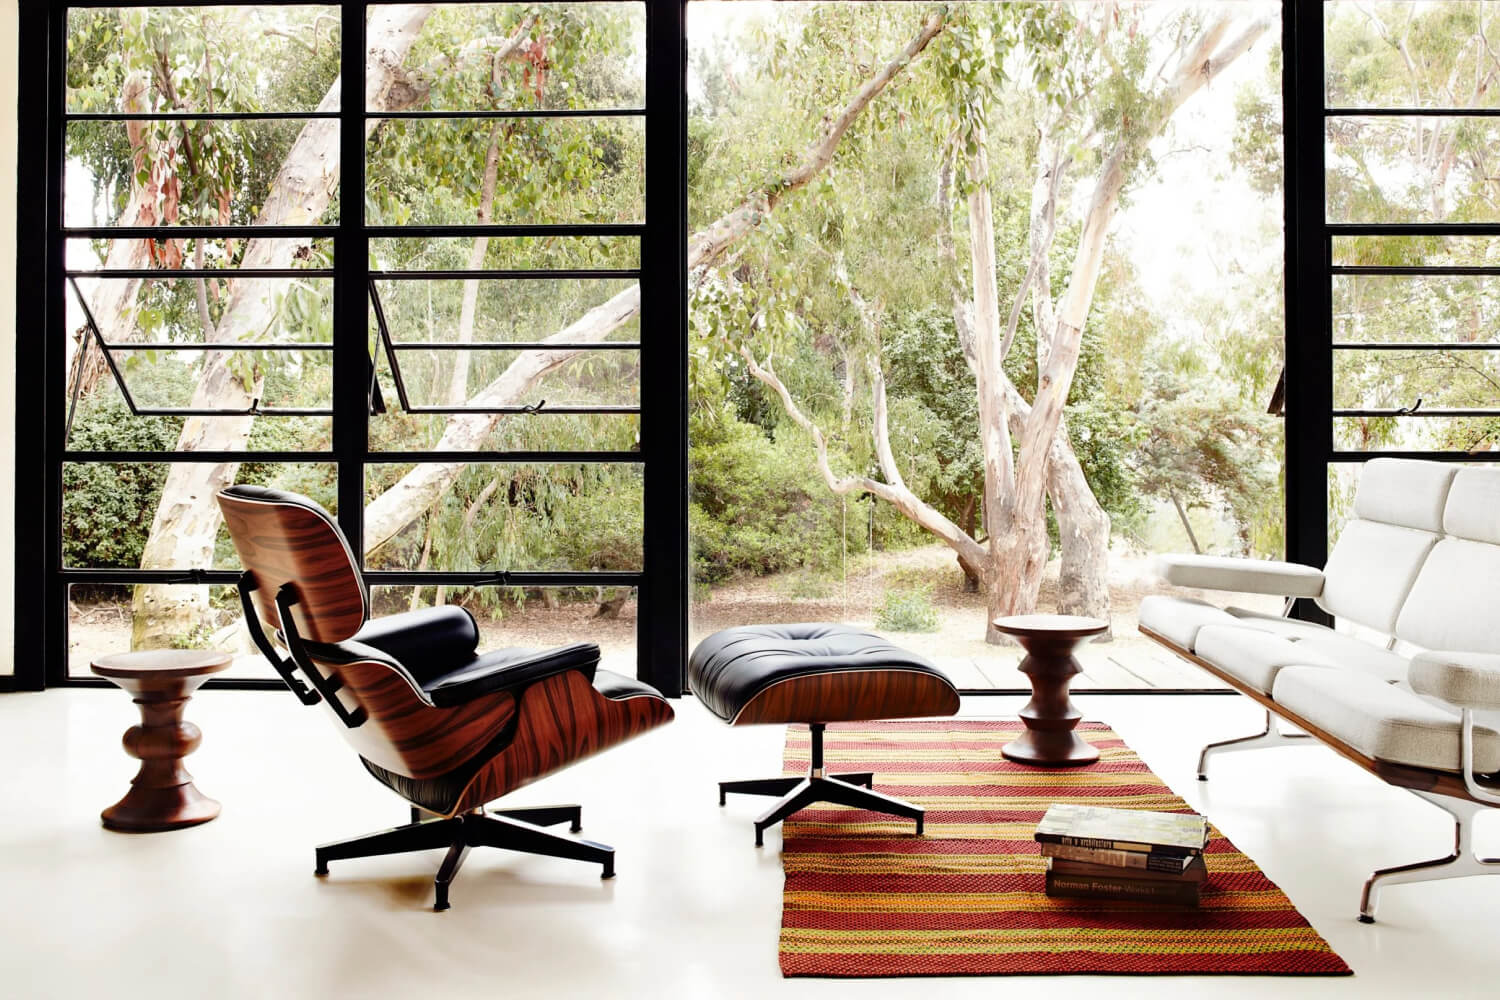 The legendary designer piece by the Eames couple. 